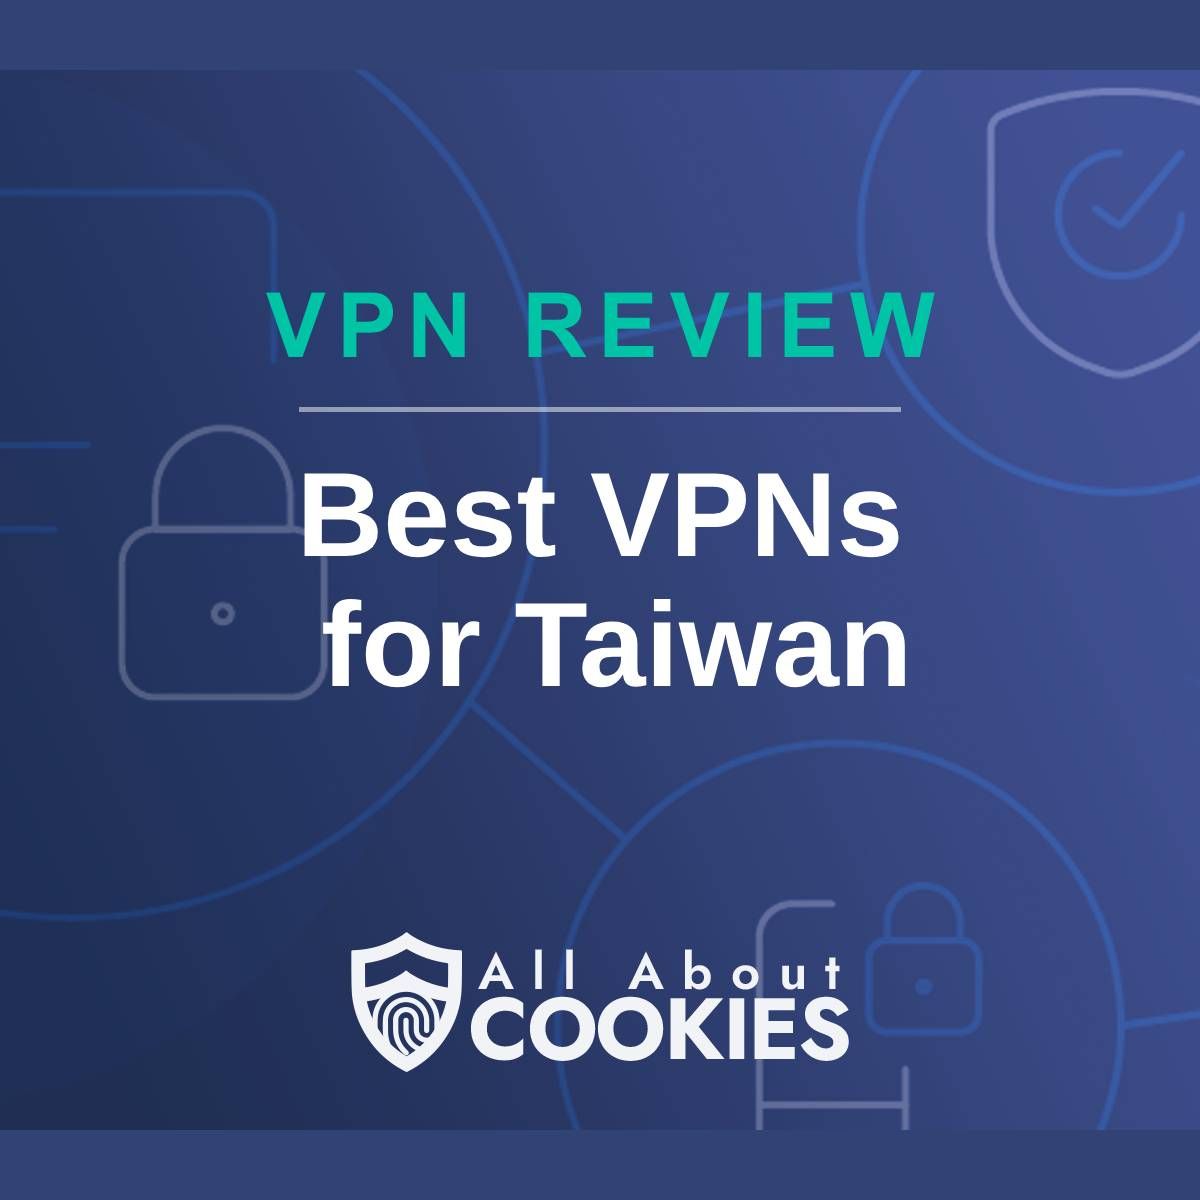 A blue background with images of locks and shields with the text &quot;VPN Review Best VPNs for Taiwan&quot; and the All About Cookies logo. 